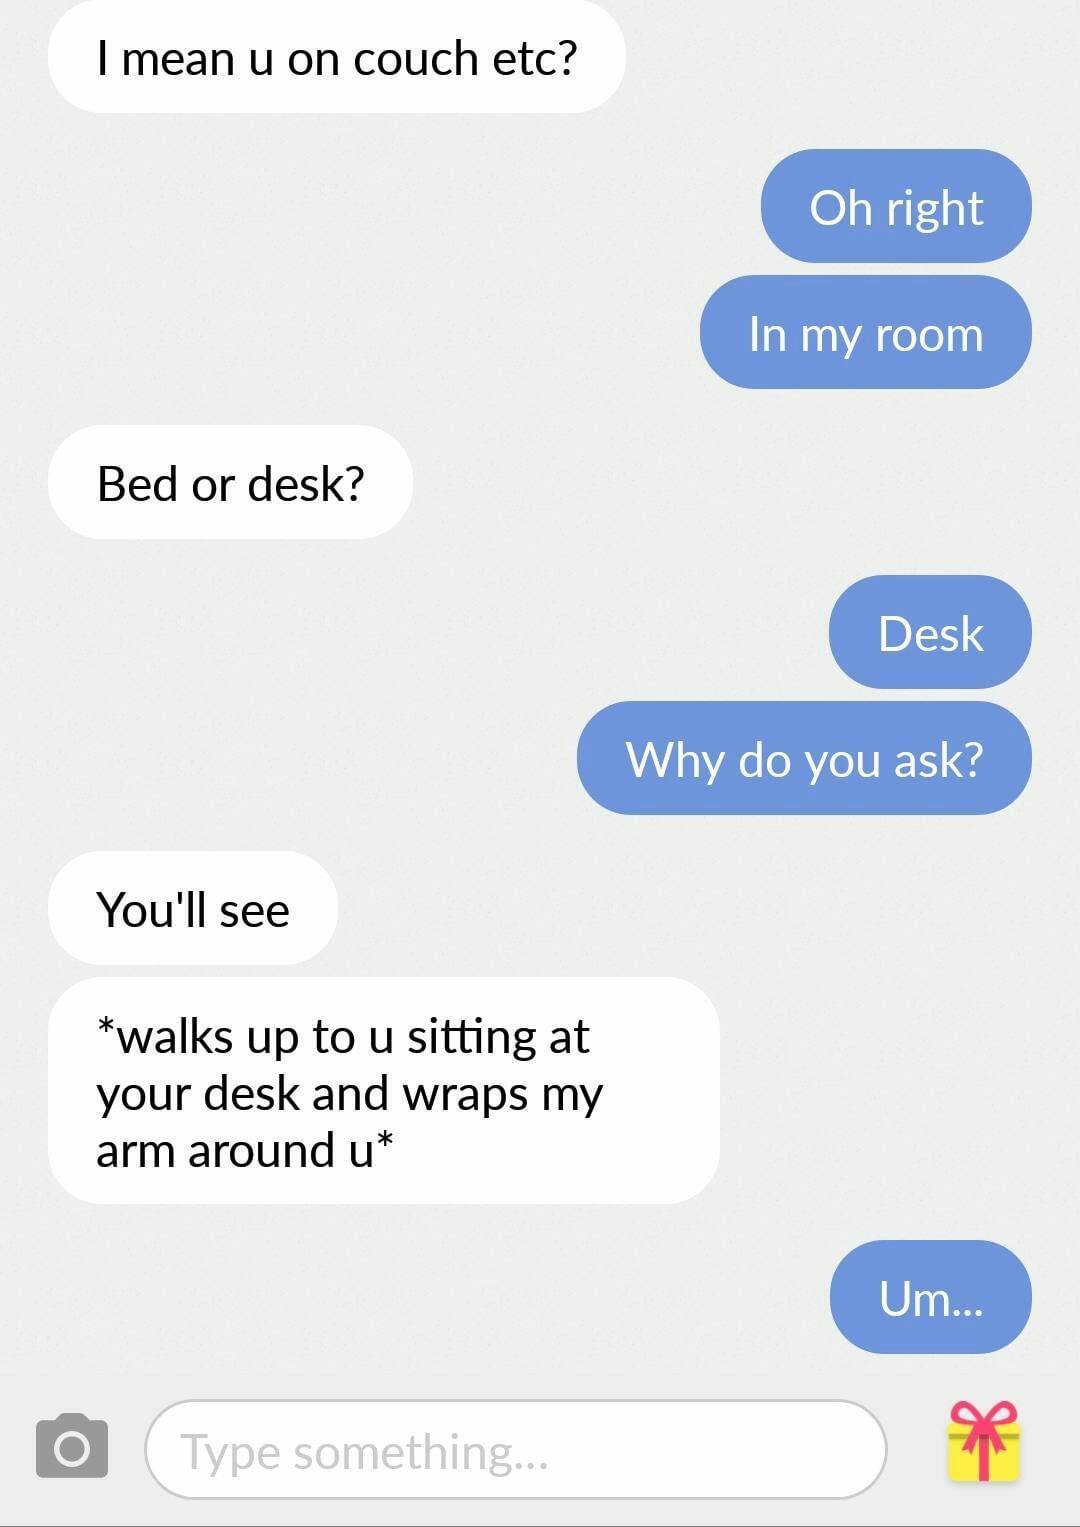 screenshot - I mean u on couch etc? Oh right In my room Bed or desk? Desk Why do you ask? You'll see walks up to u sitting at your desk and wraps my arm around u Um... Type something...